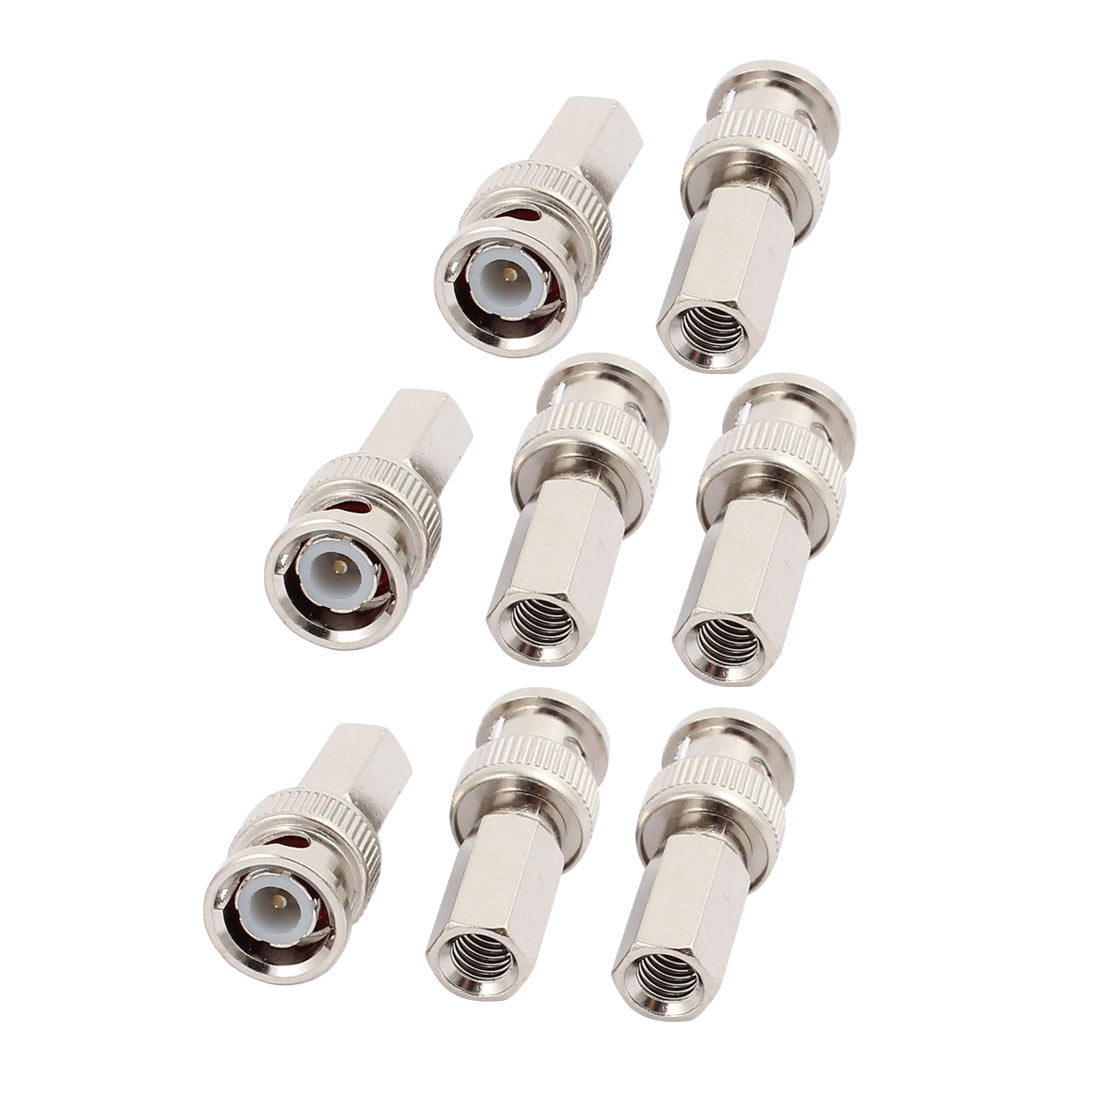 150 PCS BNC 1 Male To 2 Femal T Splitter New Connectors Adapter For CCTV Cameras